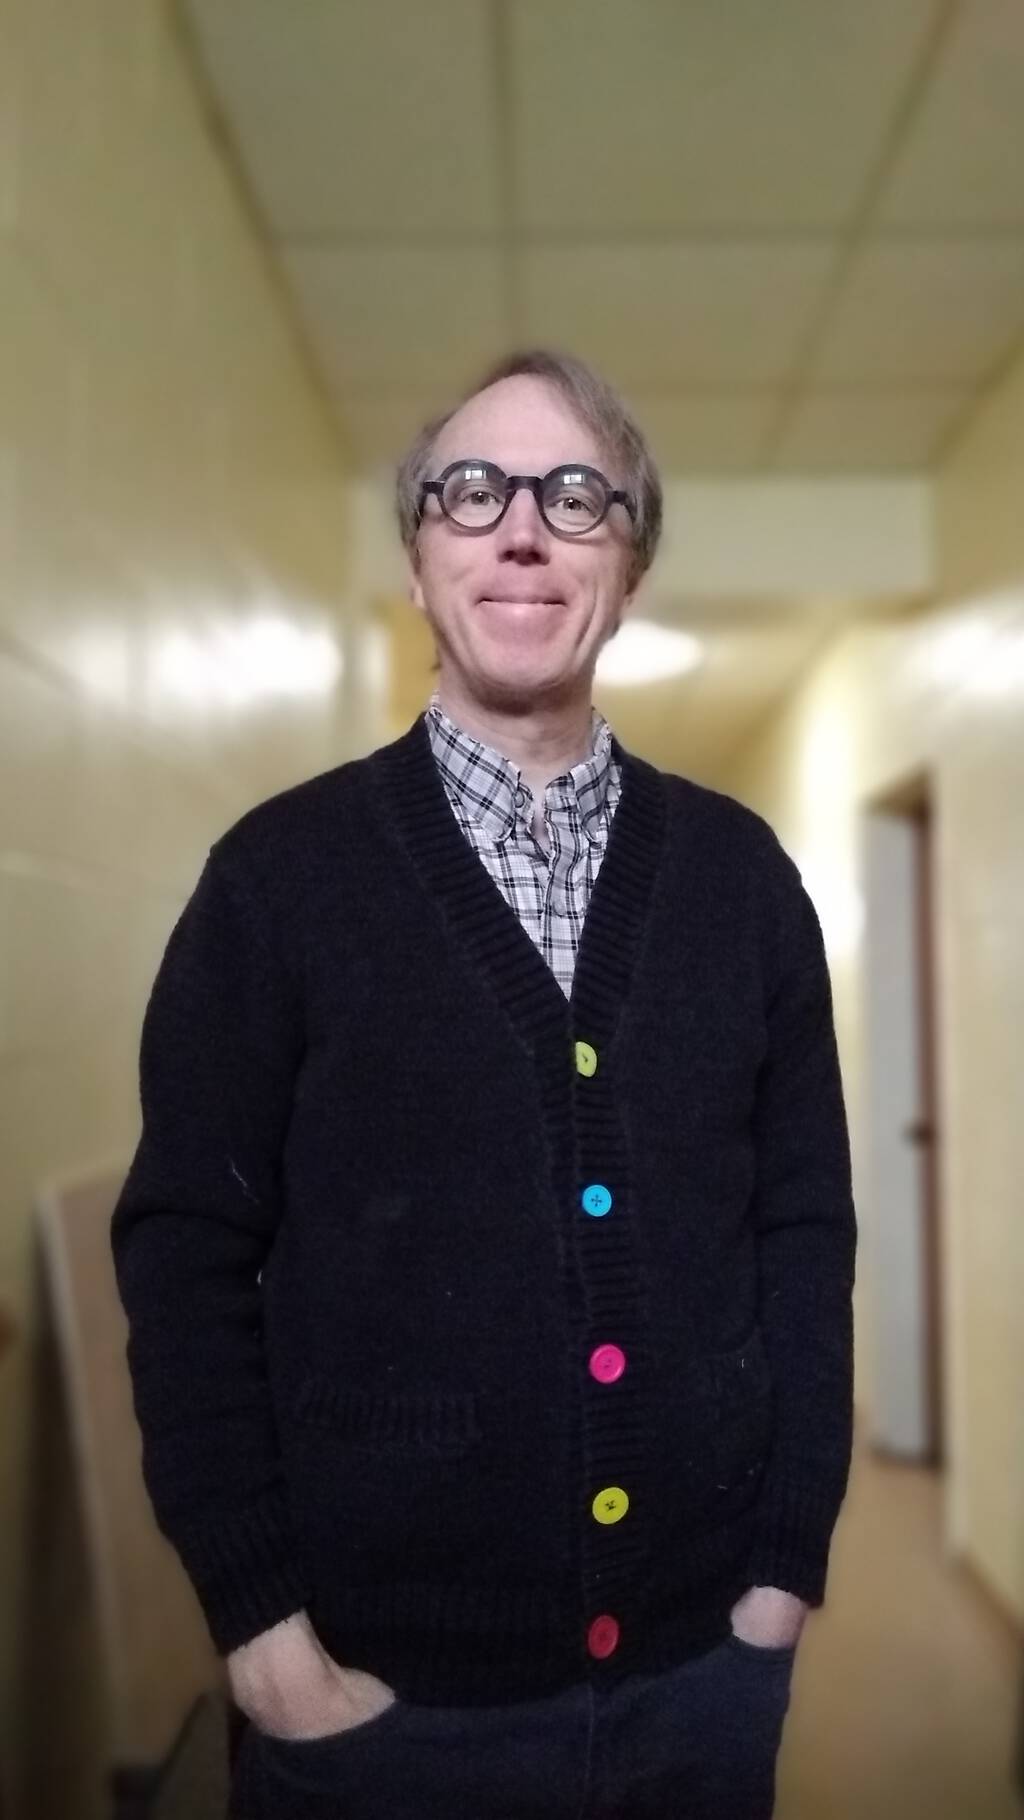 Selfie showing my sweater with new buttons